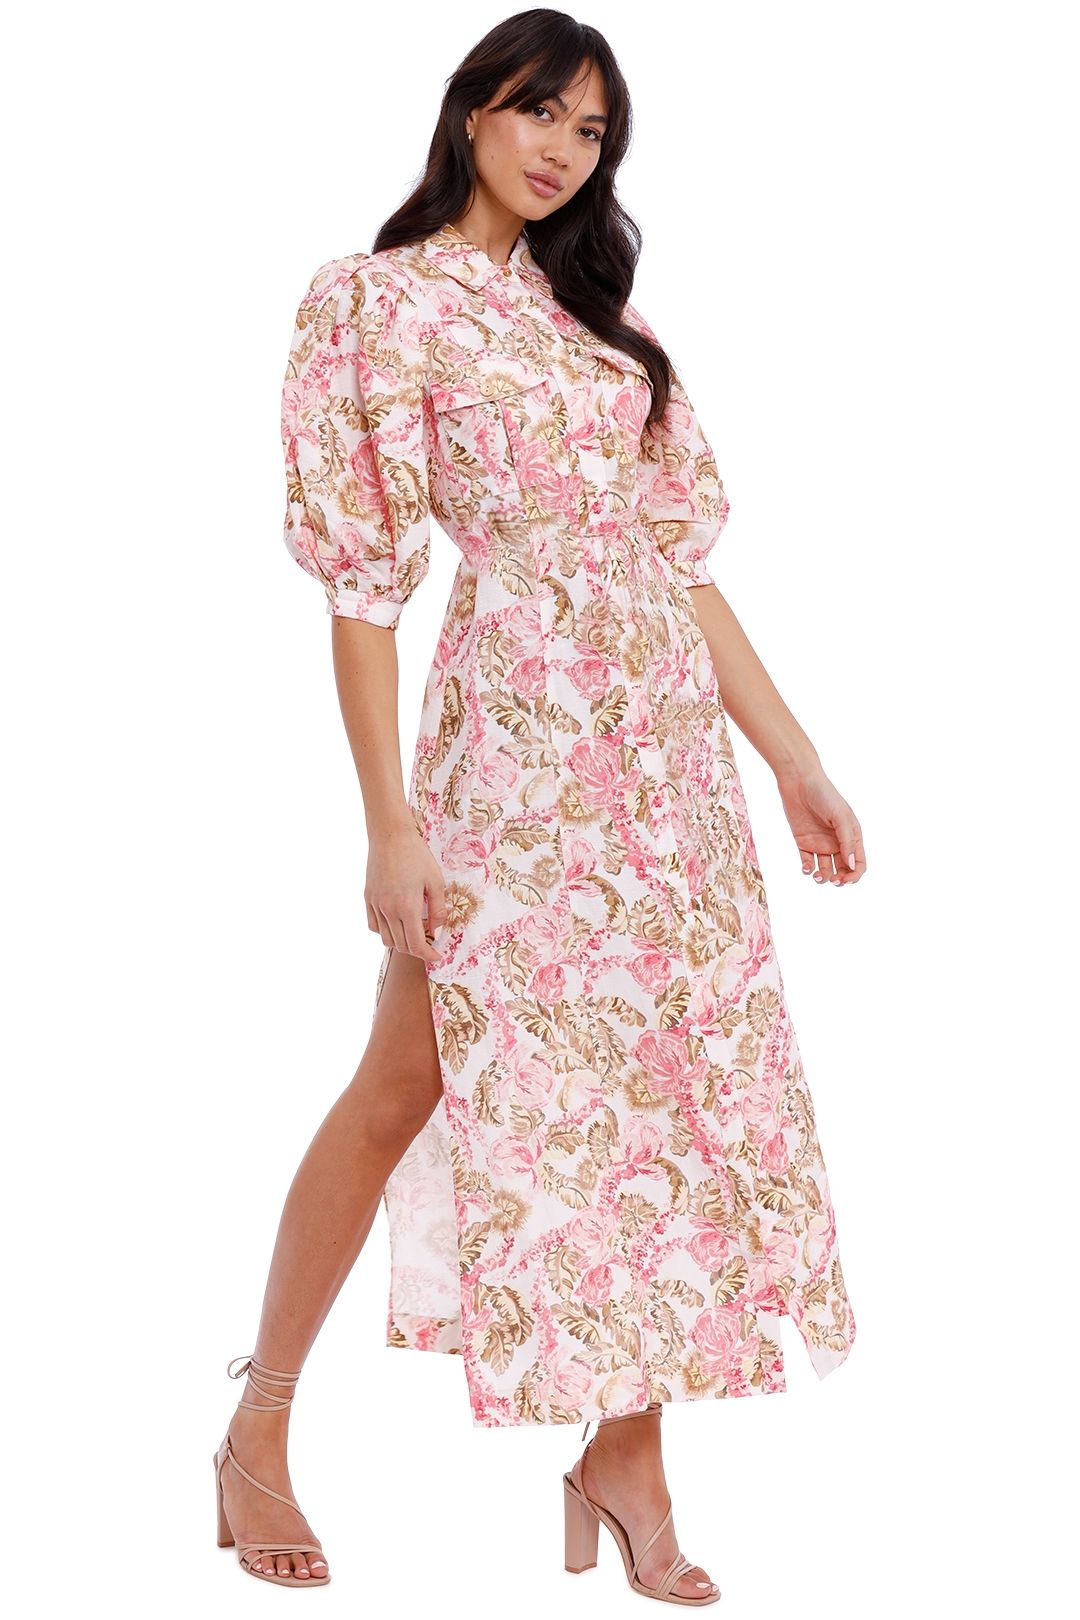 Significant Other Deanna Dress Sangria Floral midi